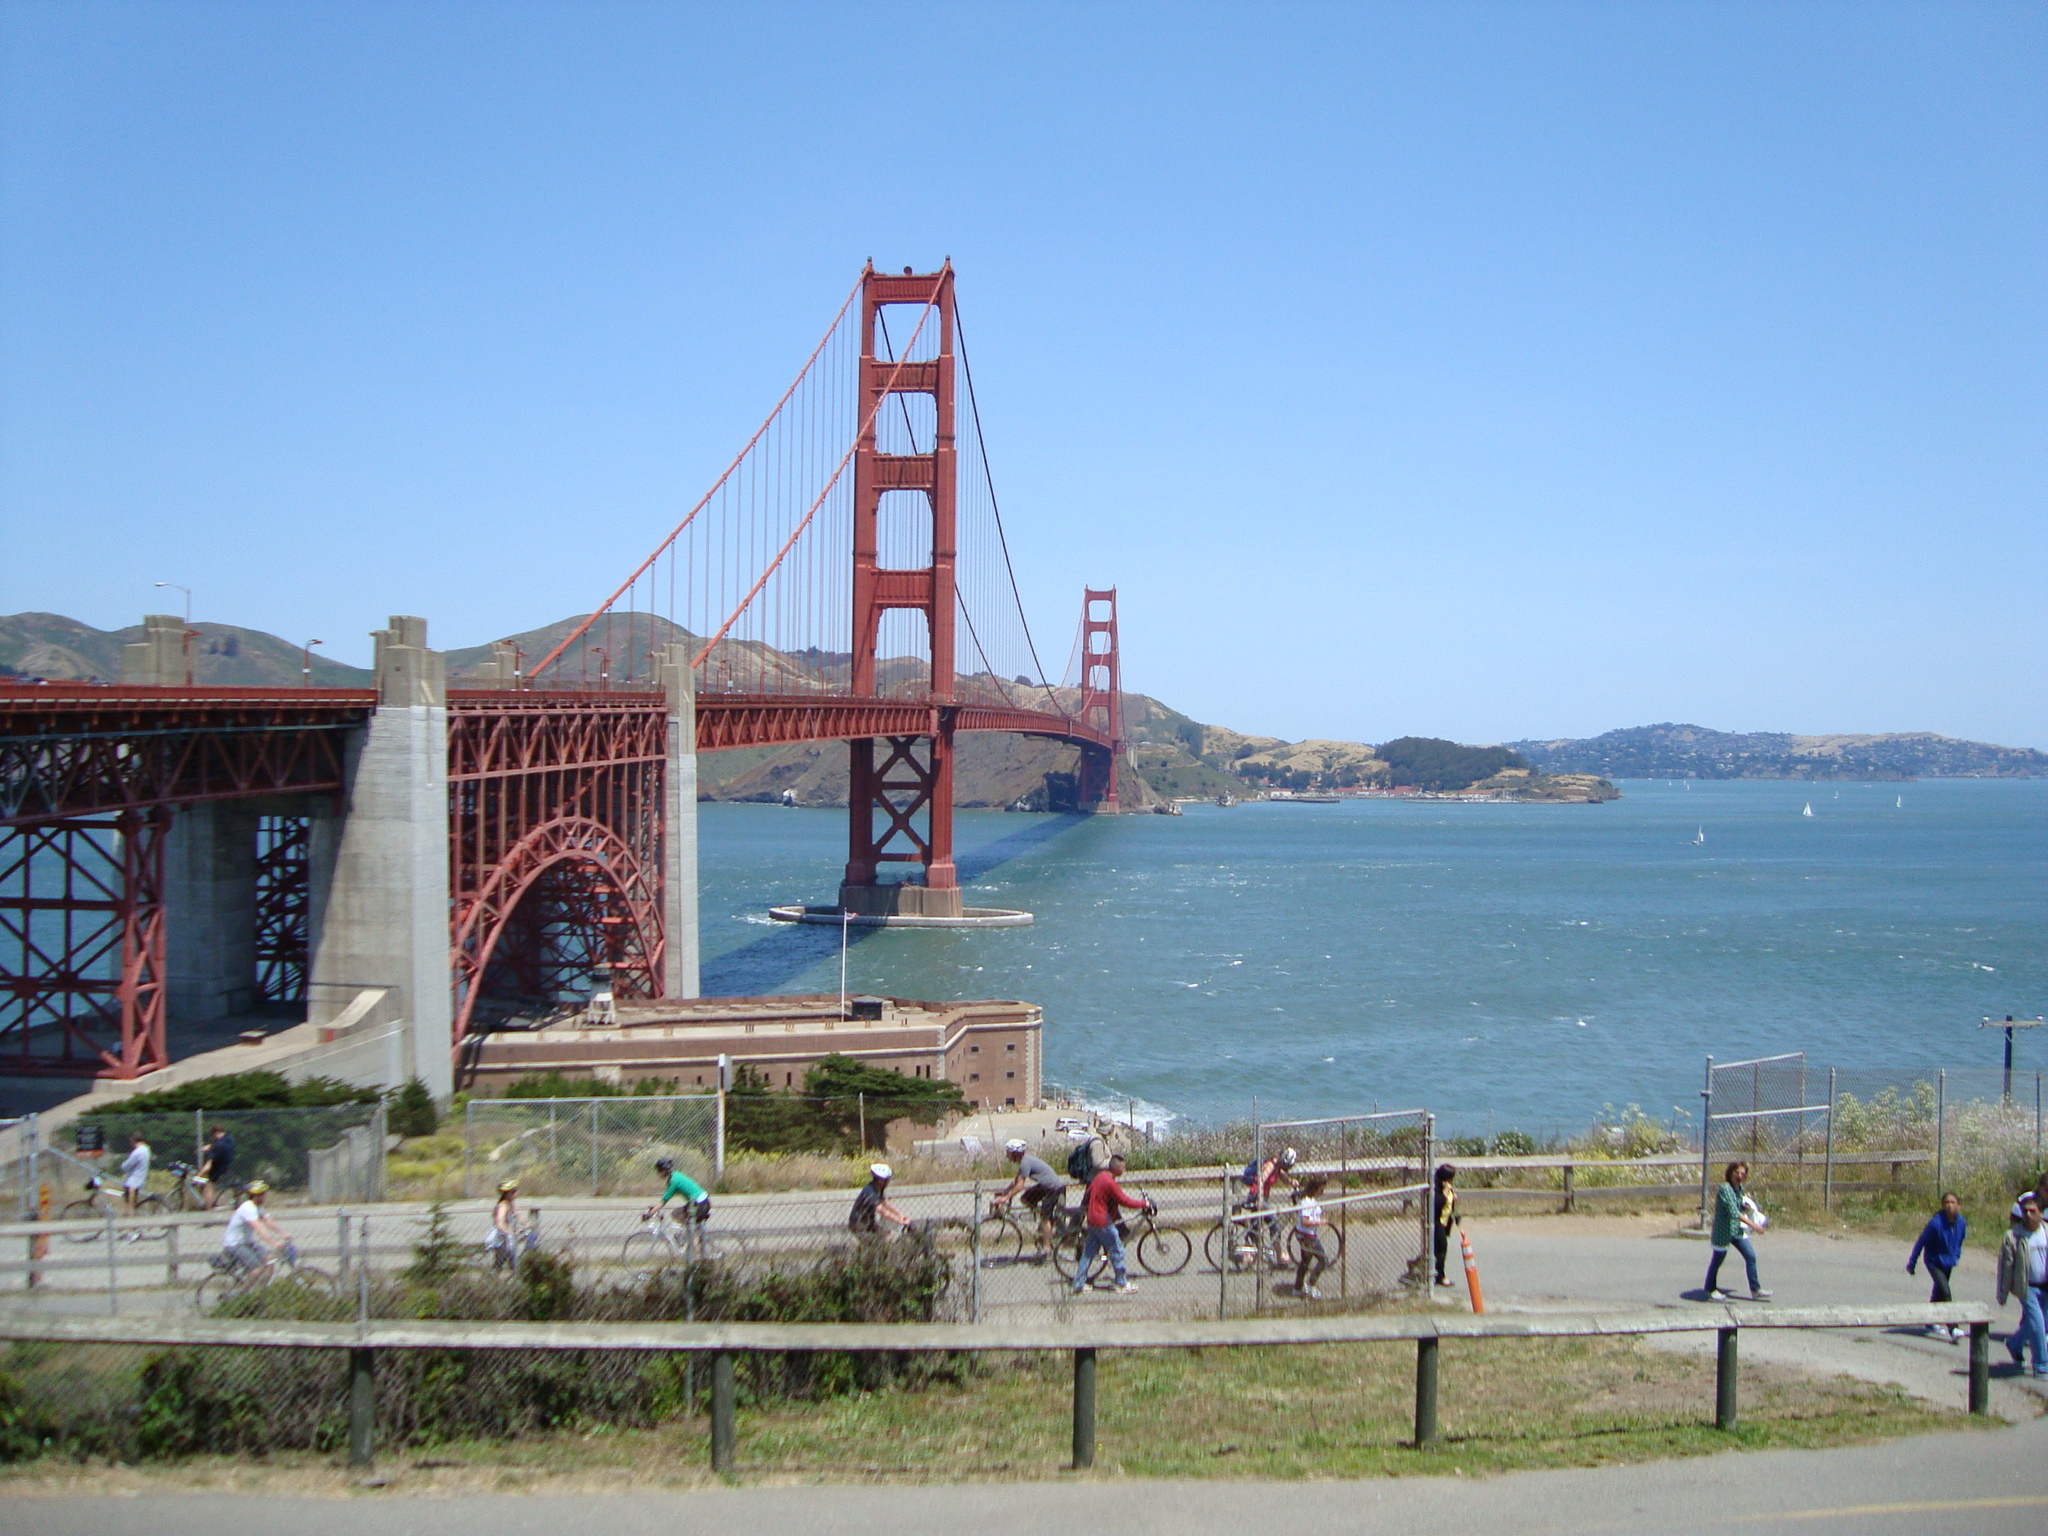 Another view of Golden Gate.